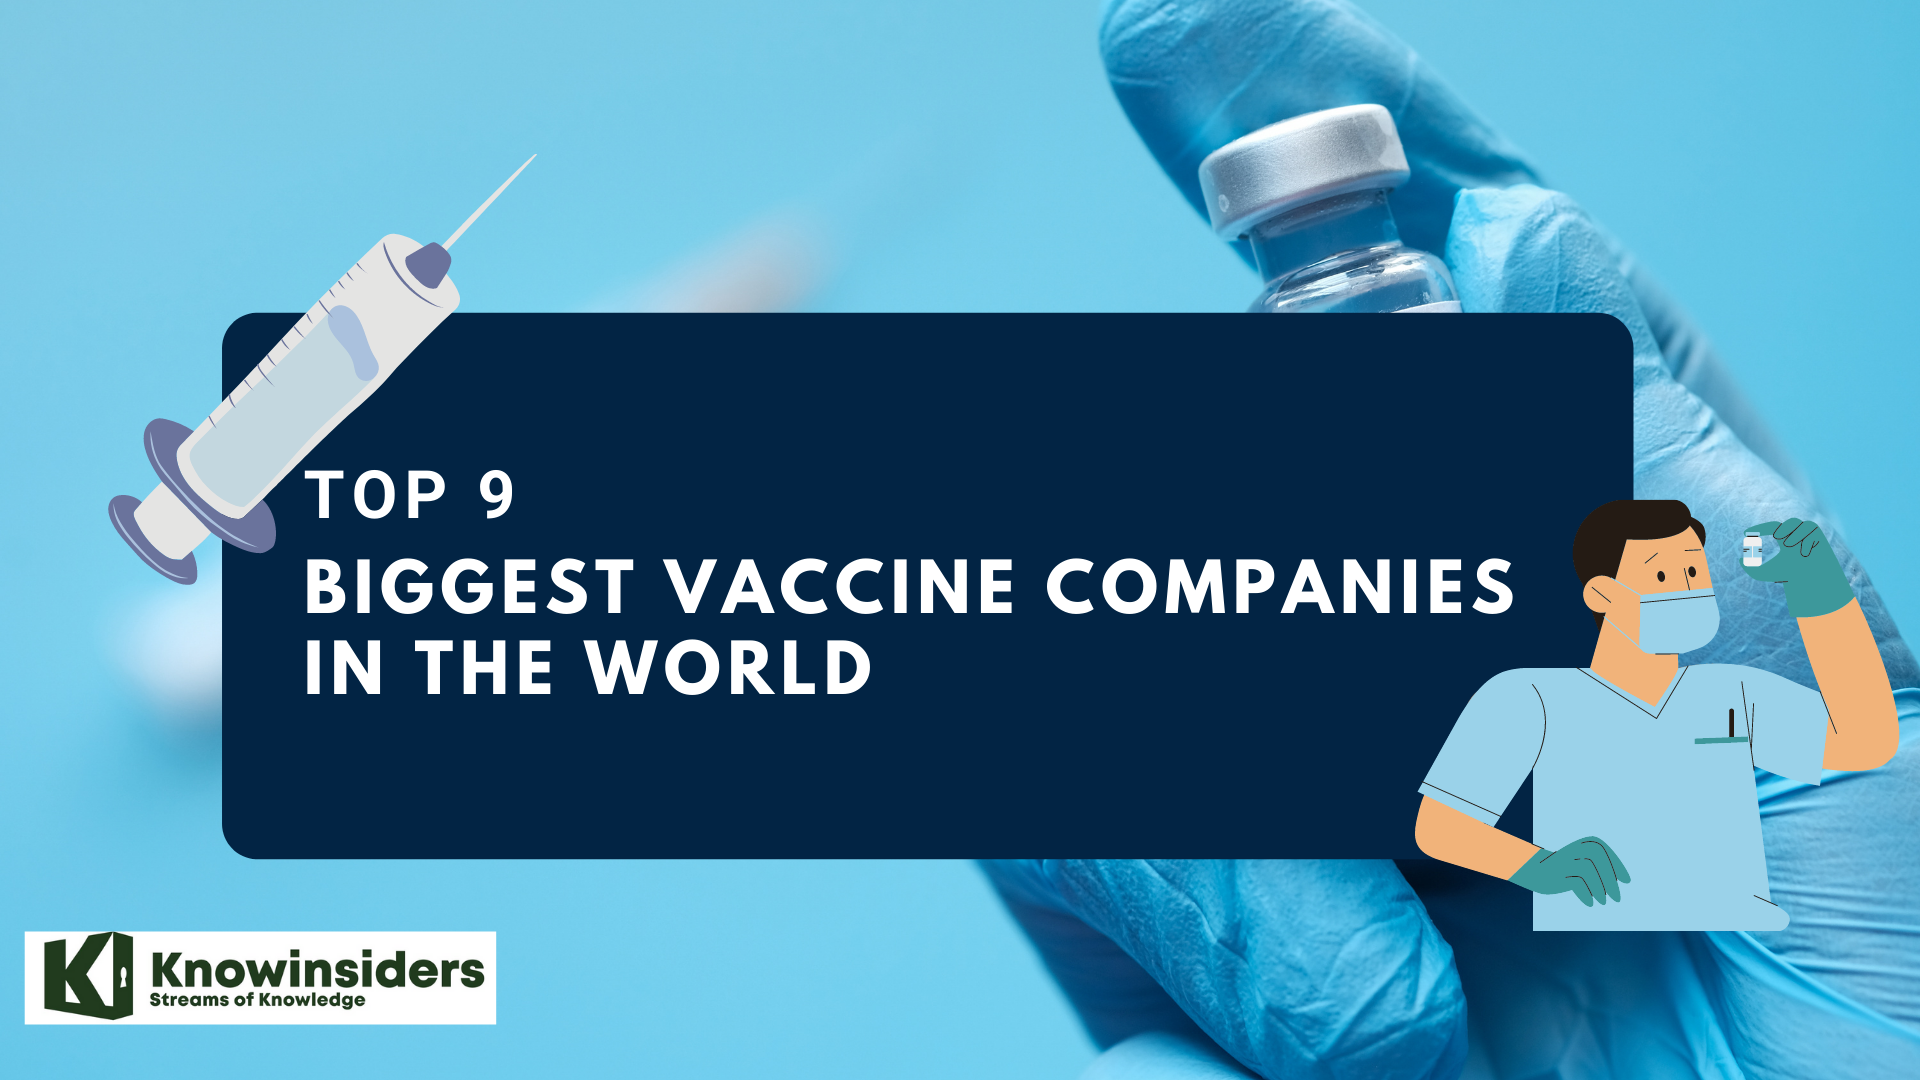 Top 9 Biggest Vaccine Companies In The World